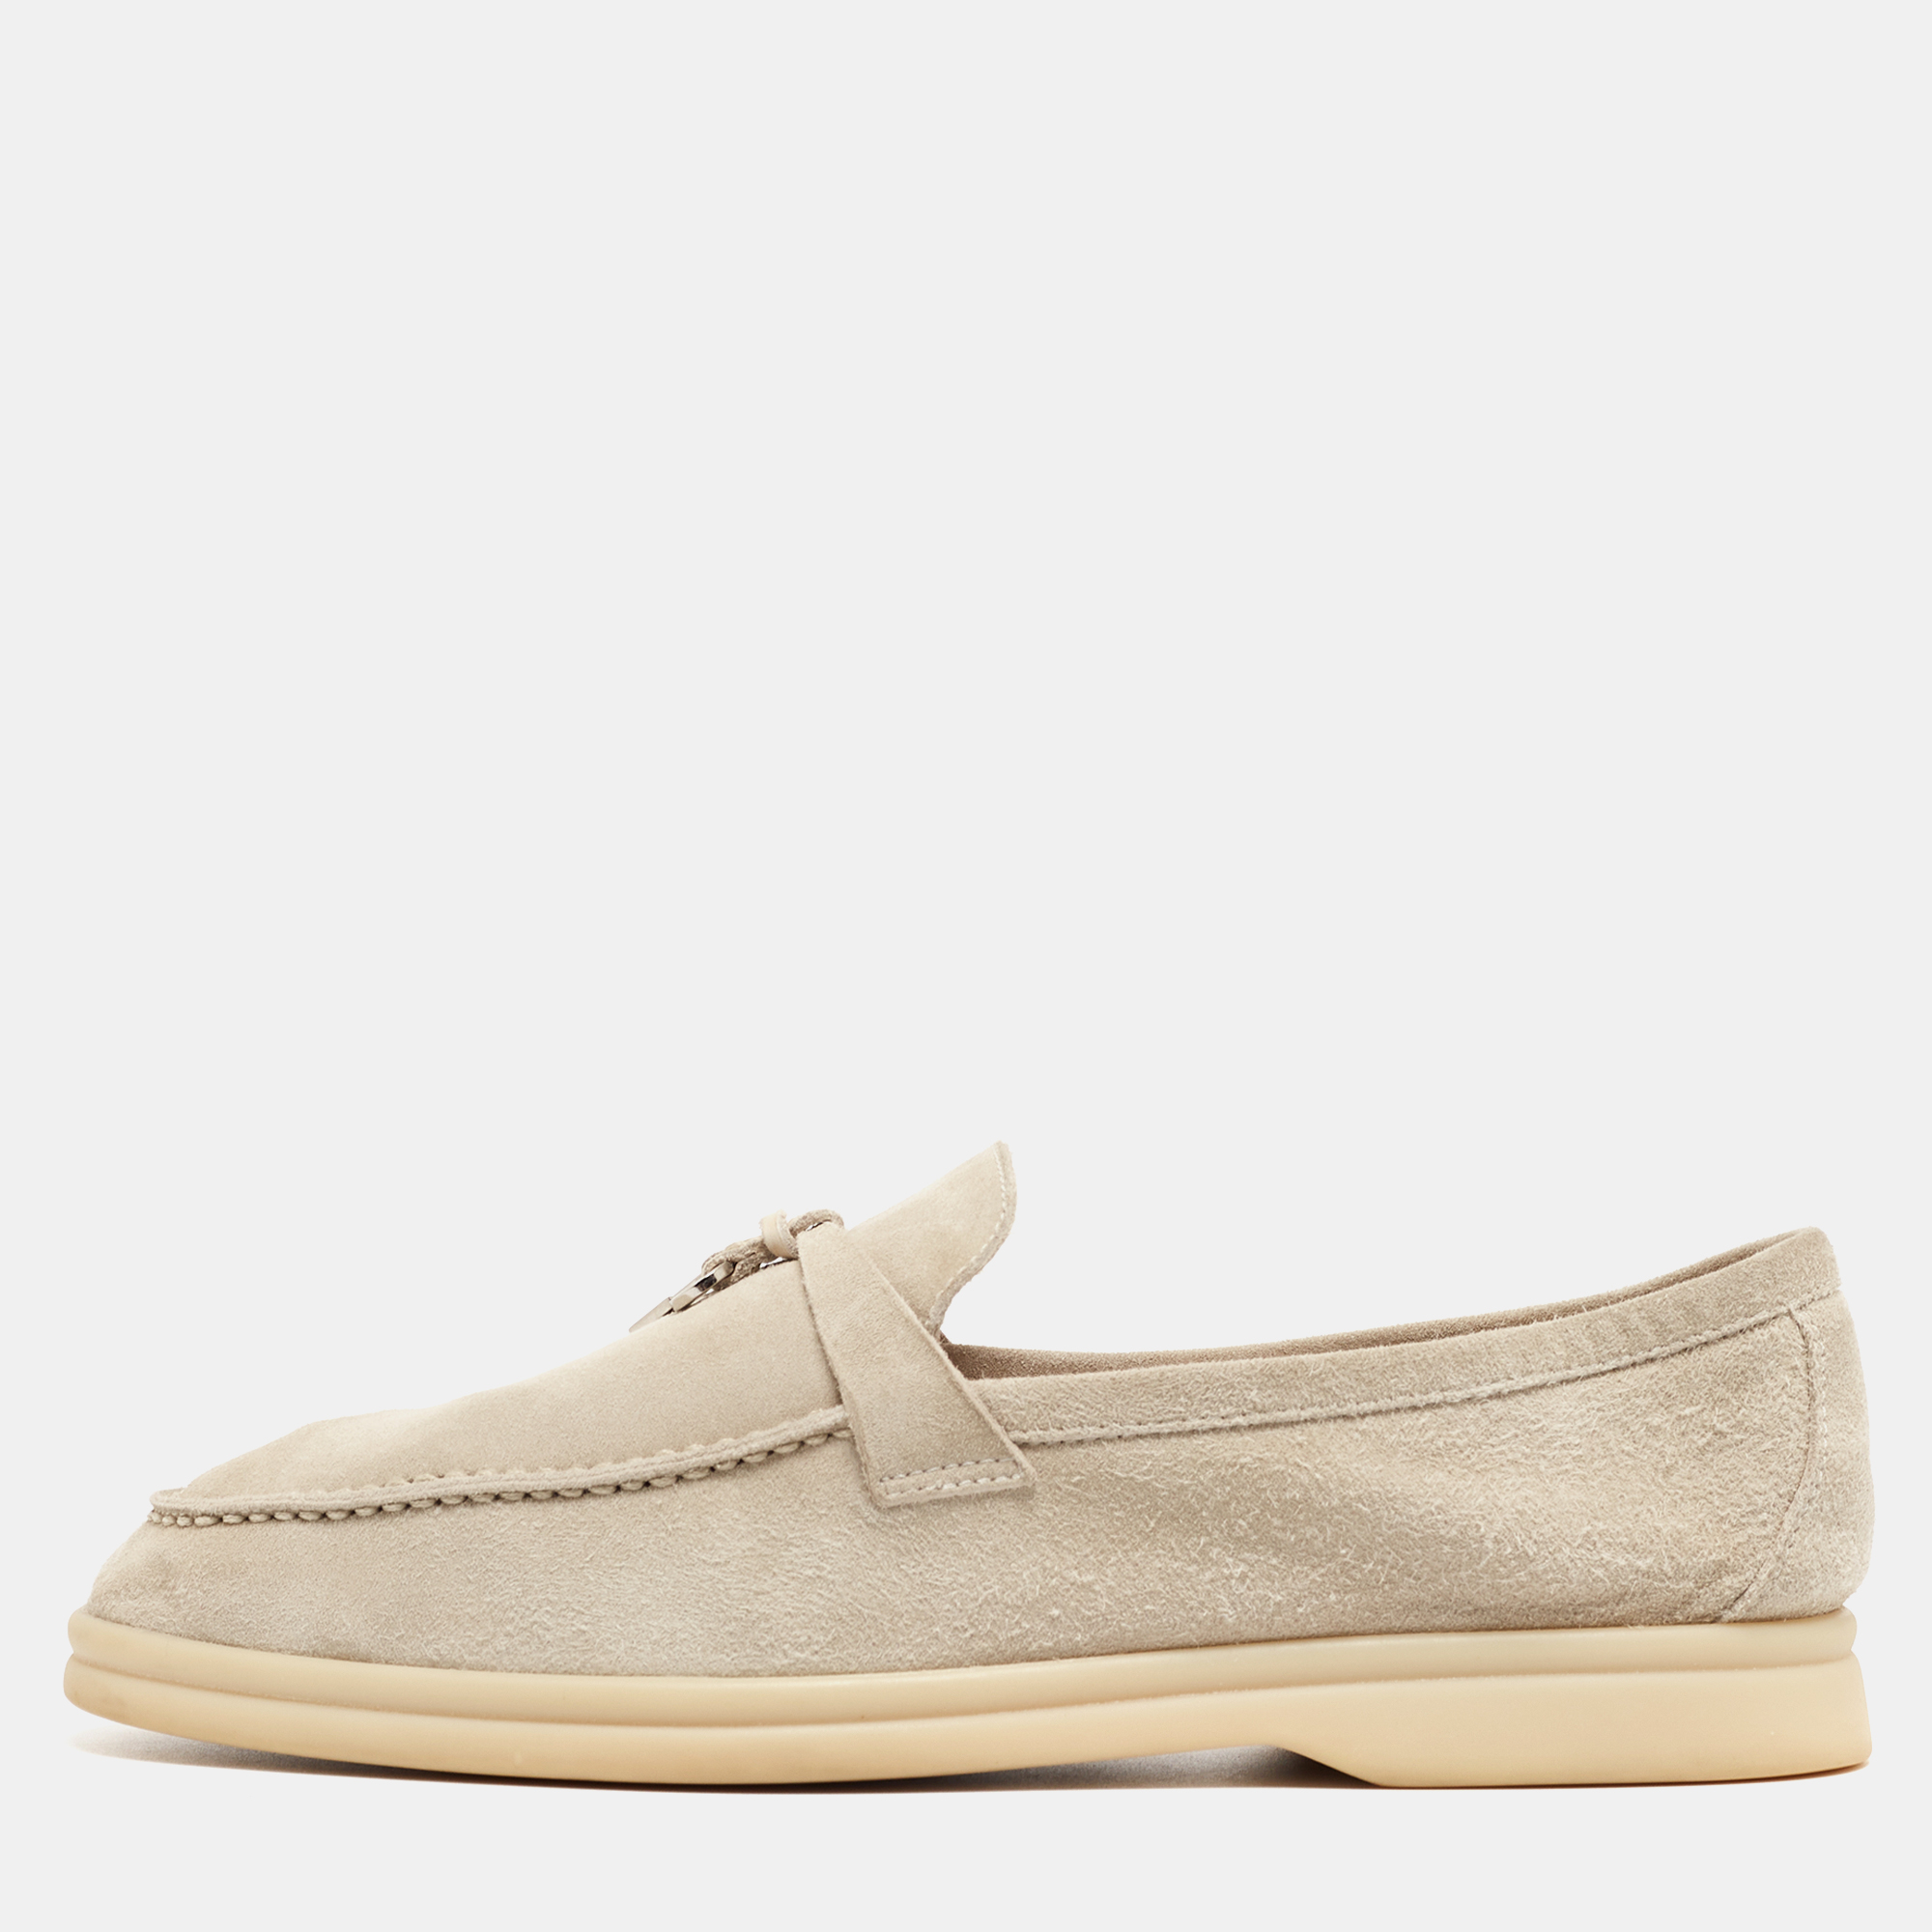 Light Grey Suede Summer Charms Walk Loafers